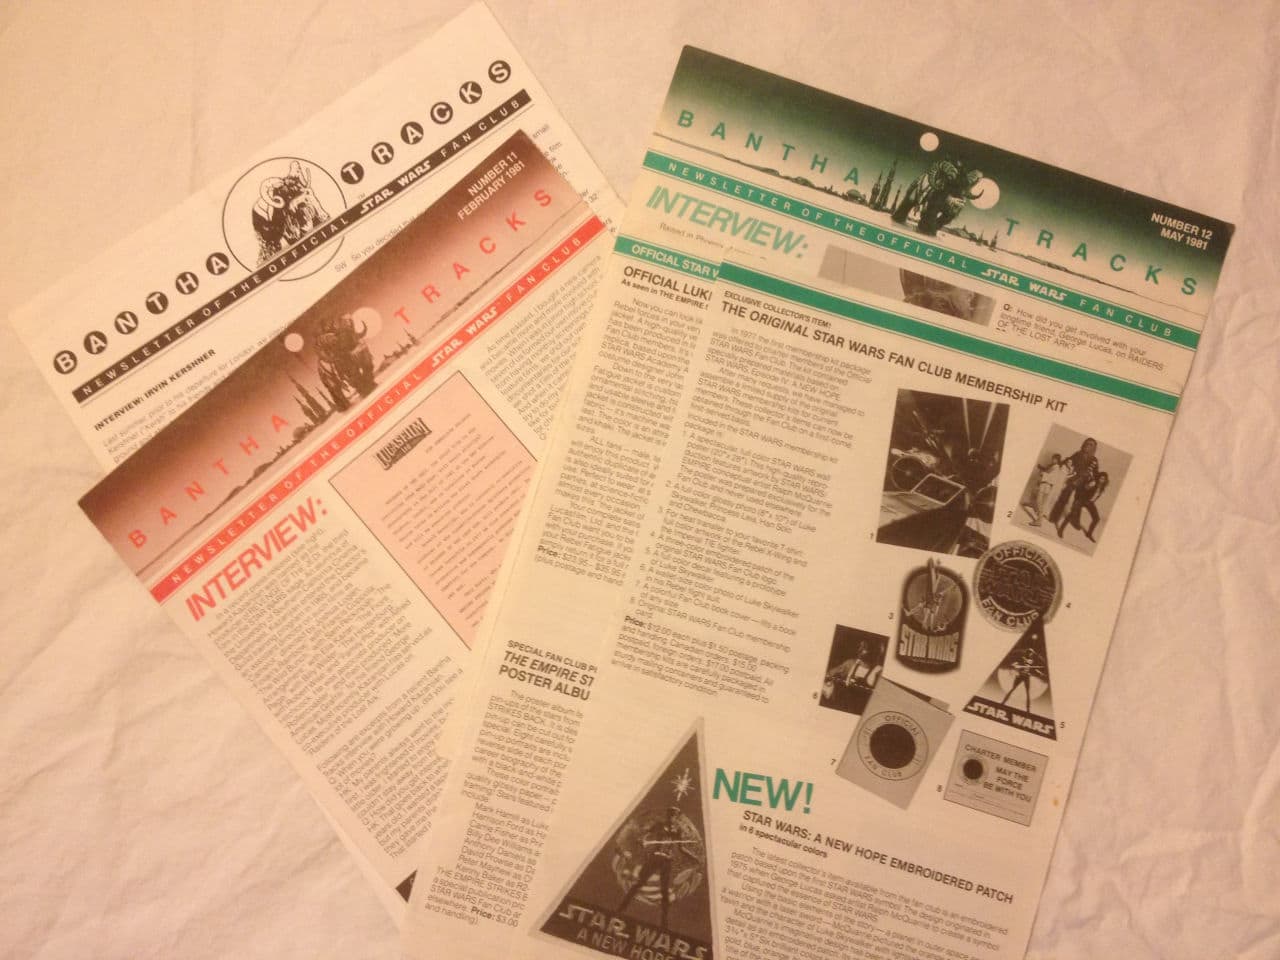 Copies of the author's Bantha Tracks newsletters from the 1980s. (Ethan Gilsdorf/Courtesy)